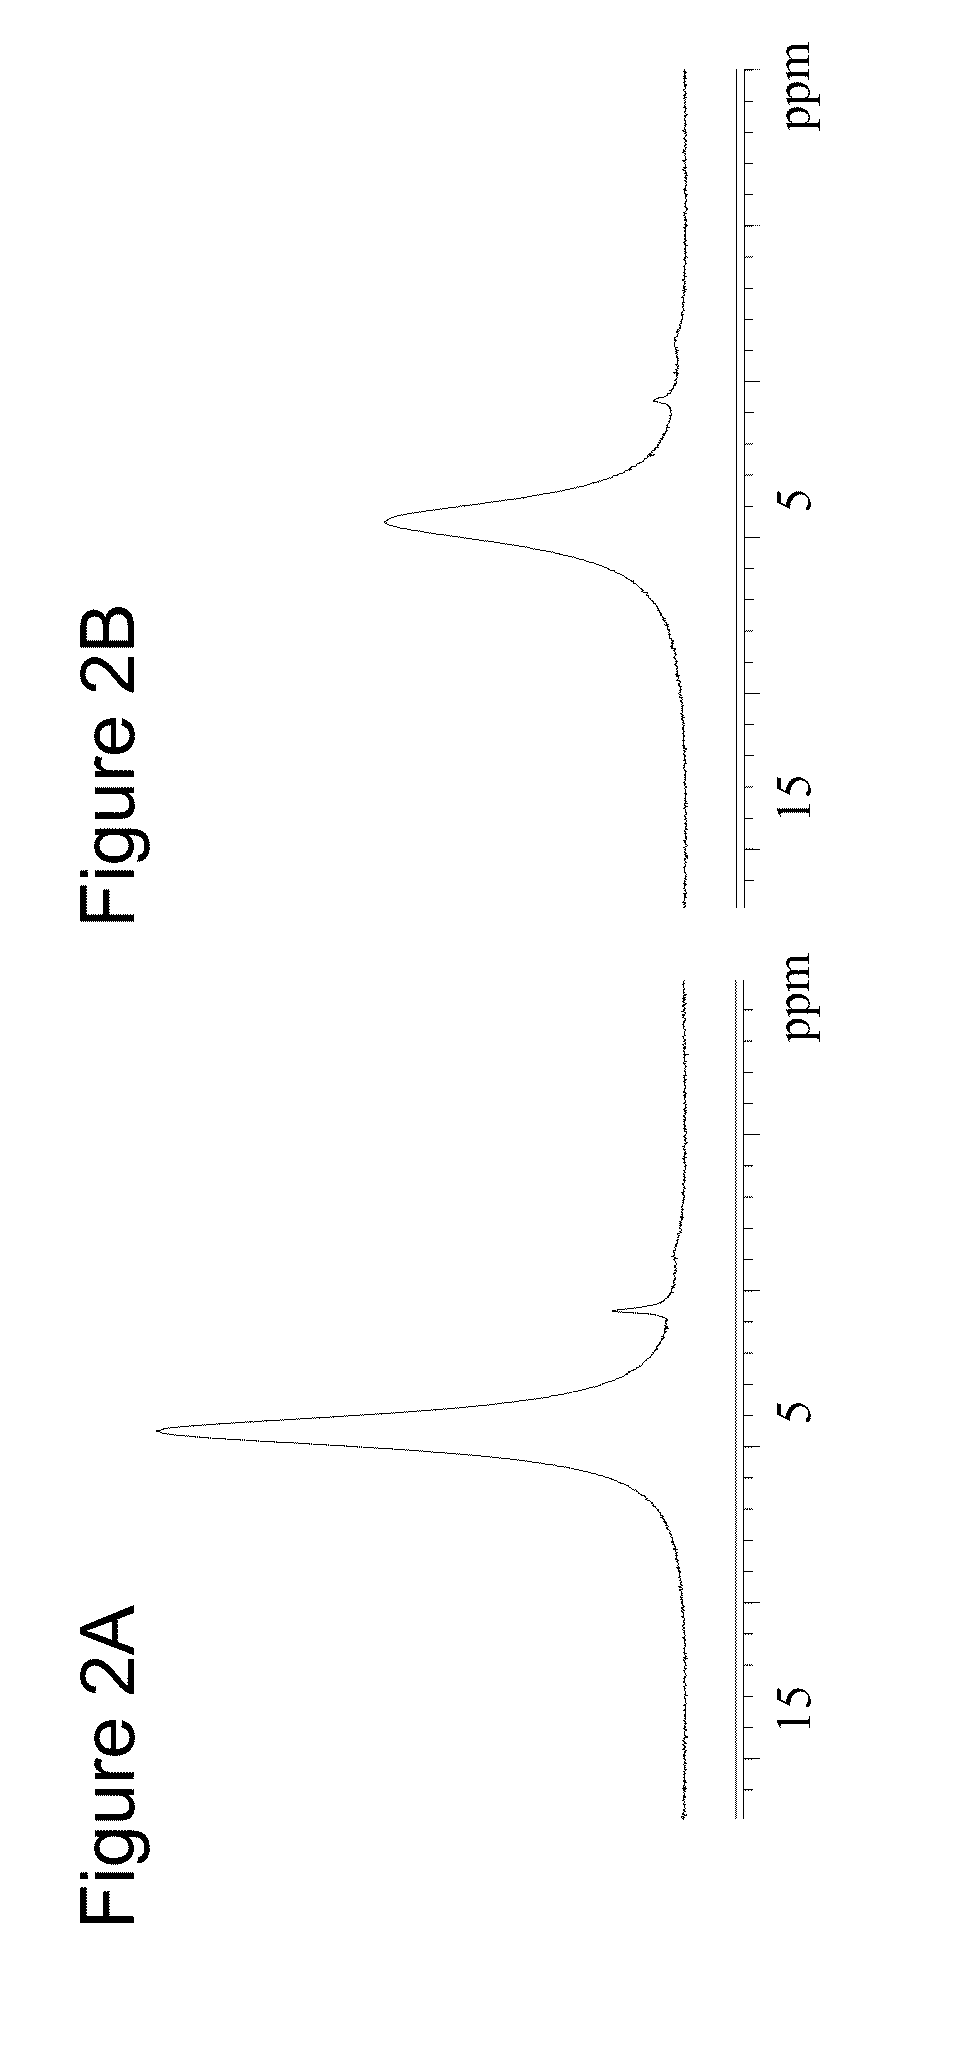 Reactors and methods for producing spin enriched hydrogen gas